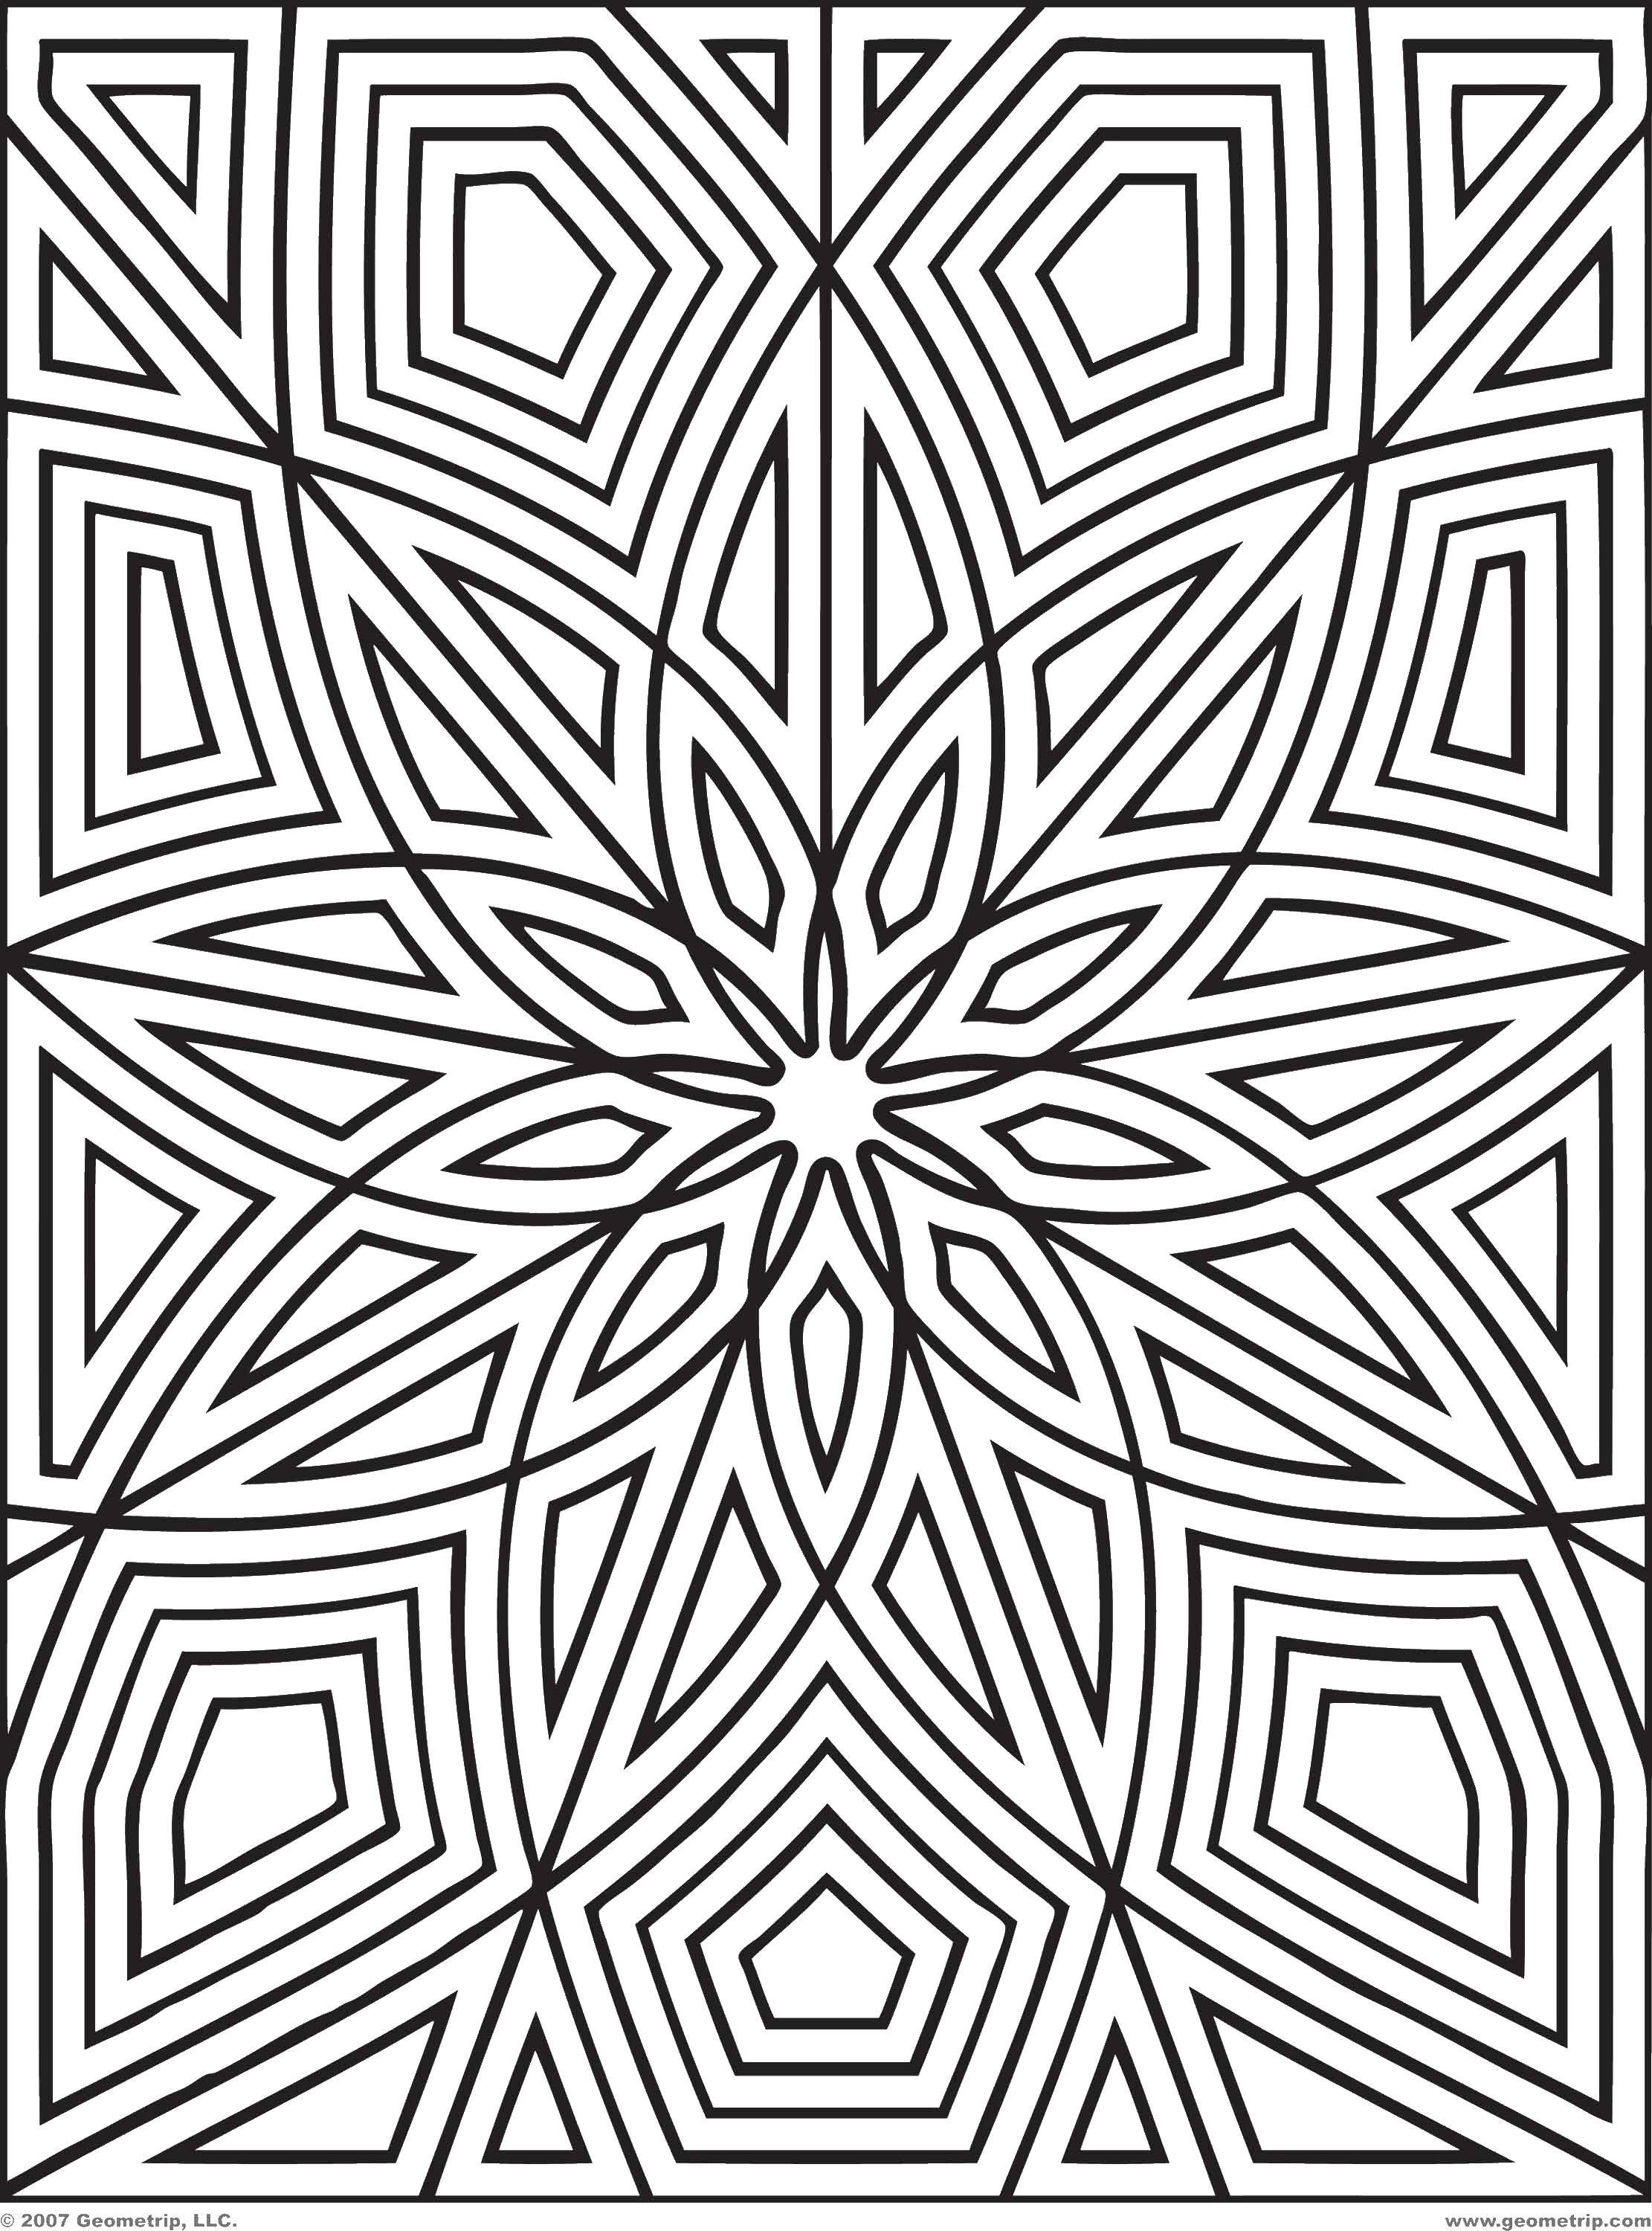 Coloring Geometric flower. Category Patterns. Tags:  Patterns, flower.